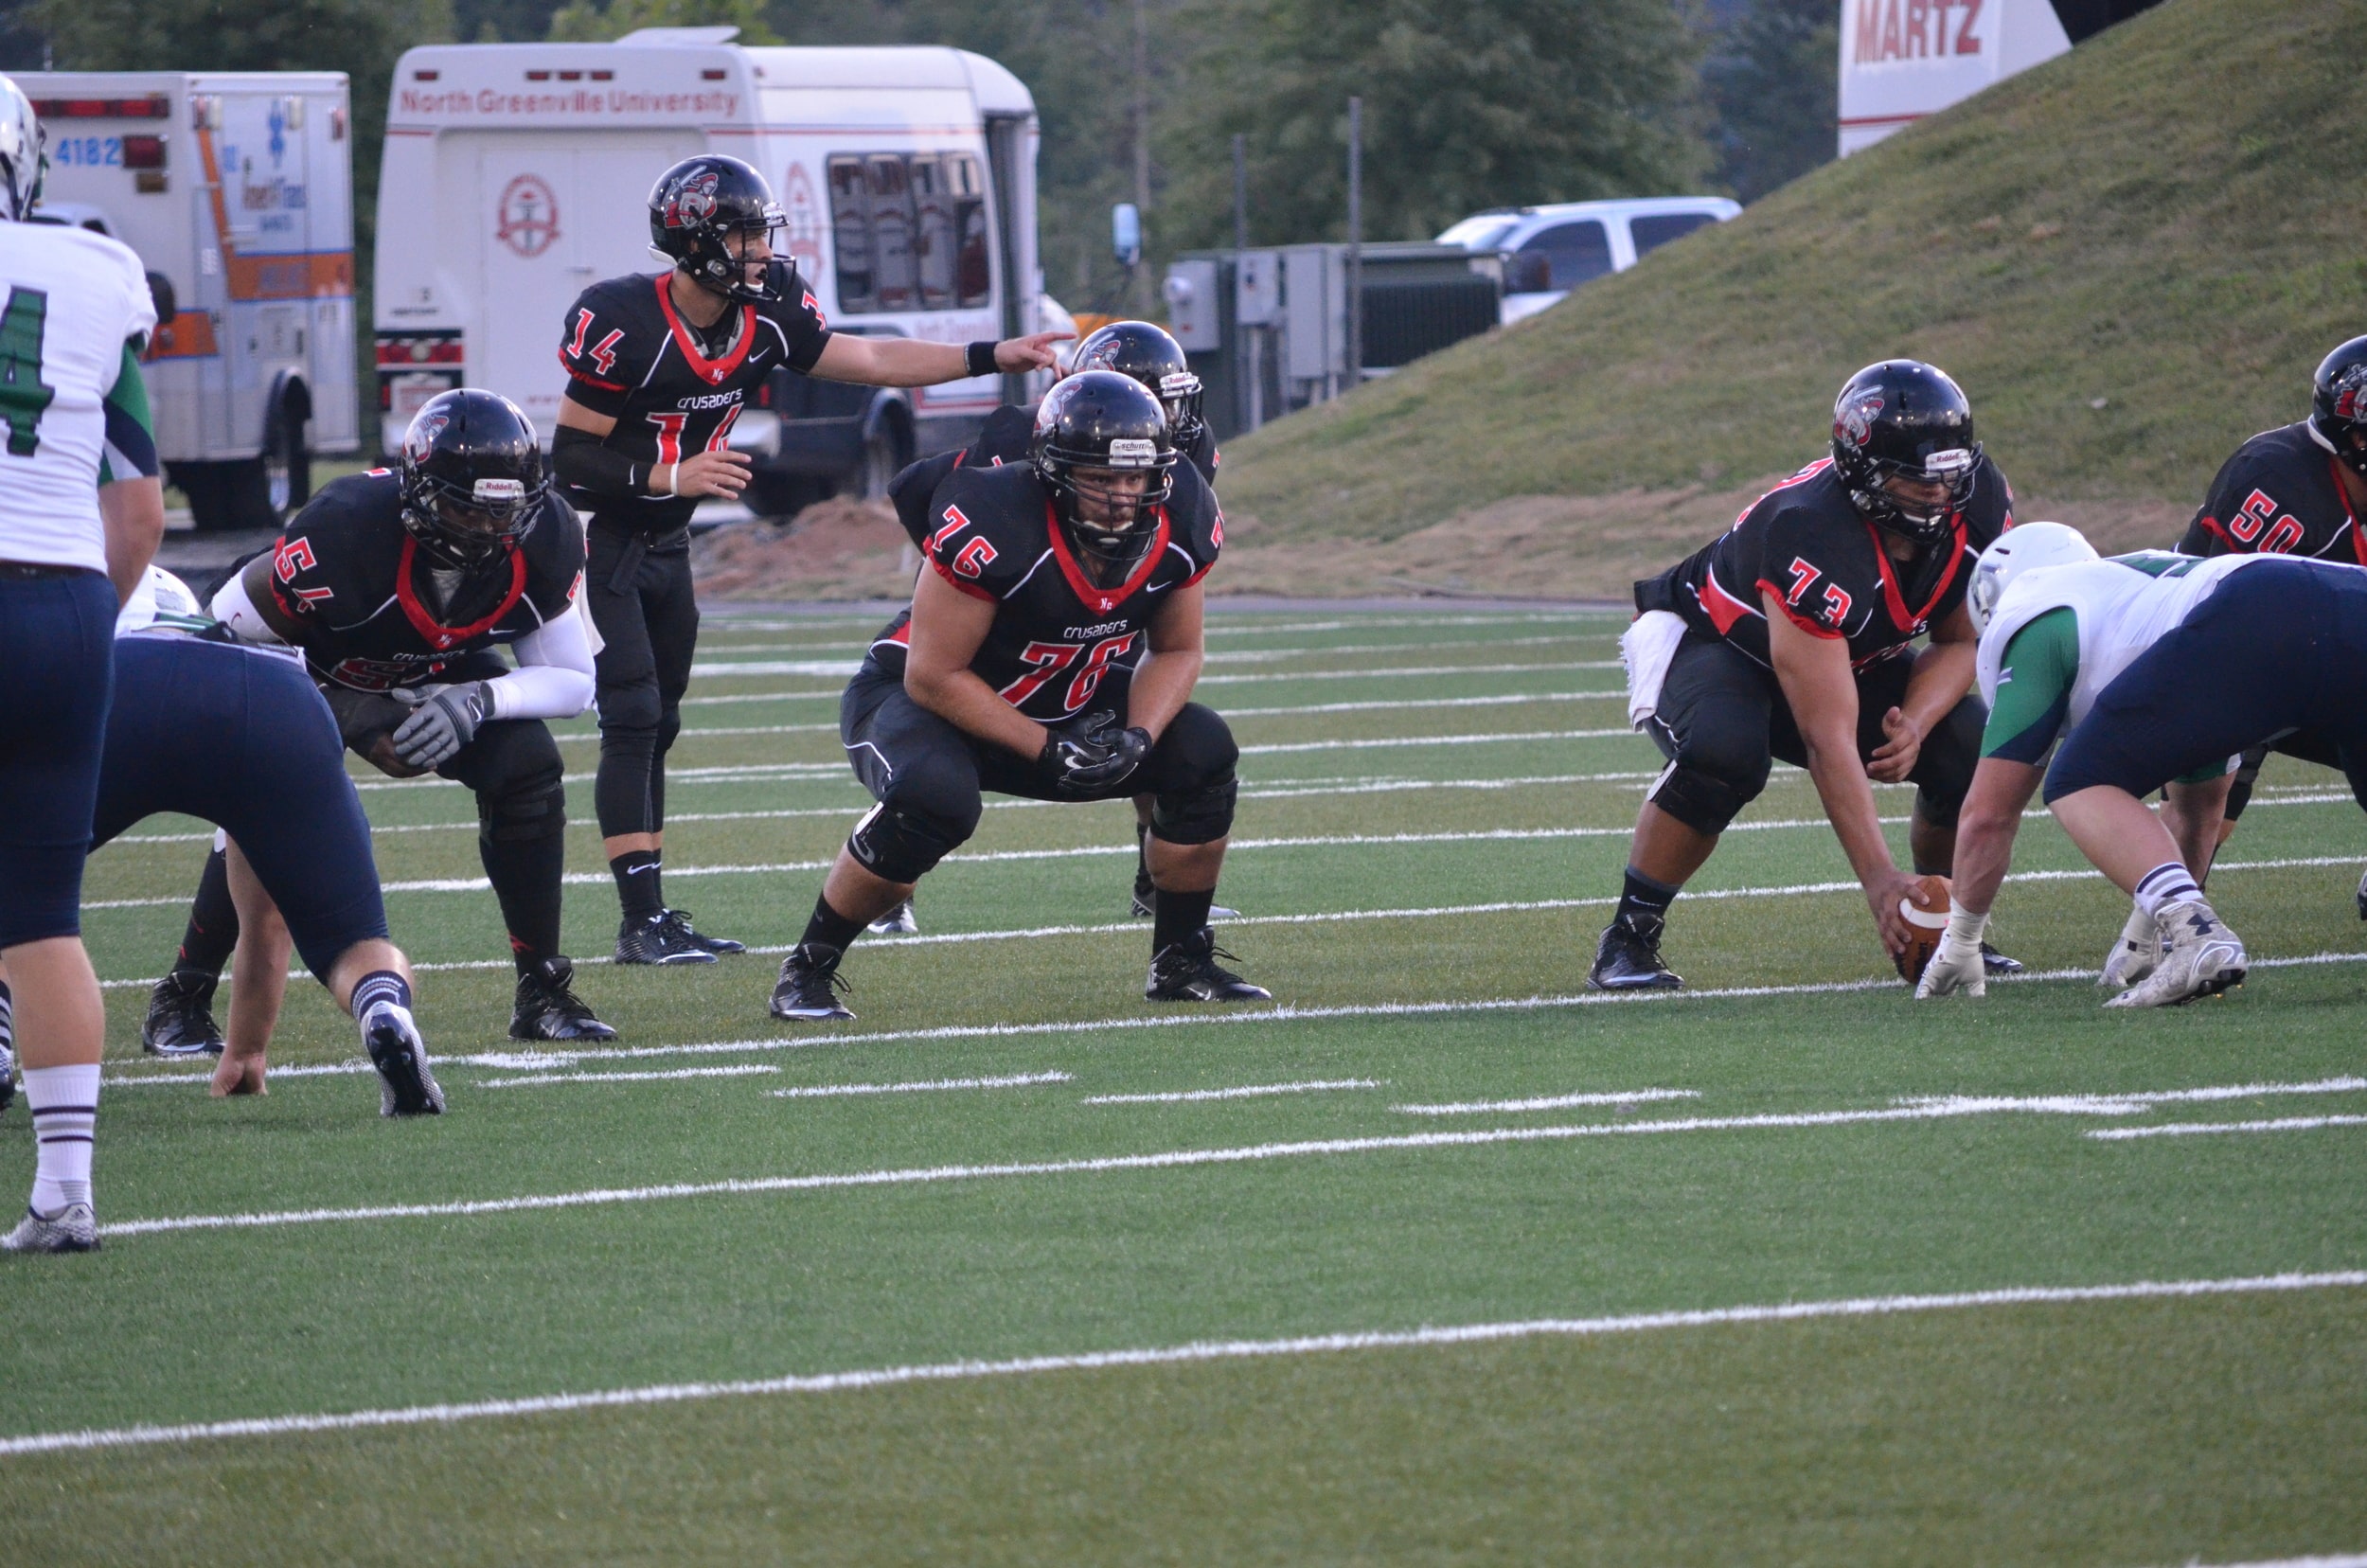  The Crusaders prepare for the first down of the first quarter 